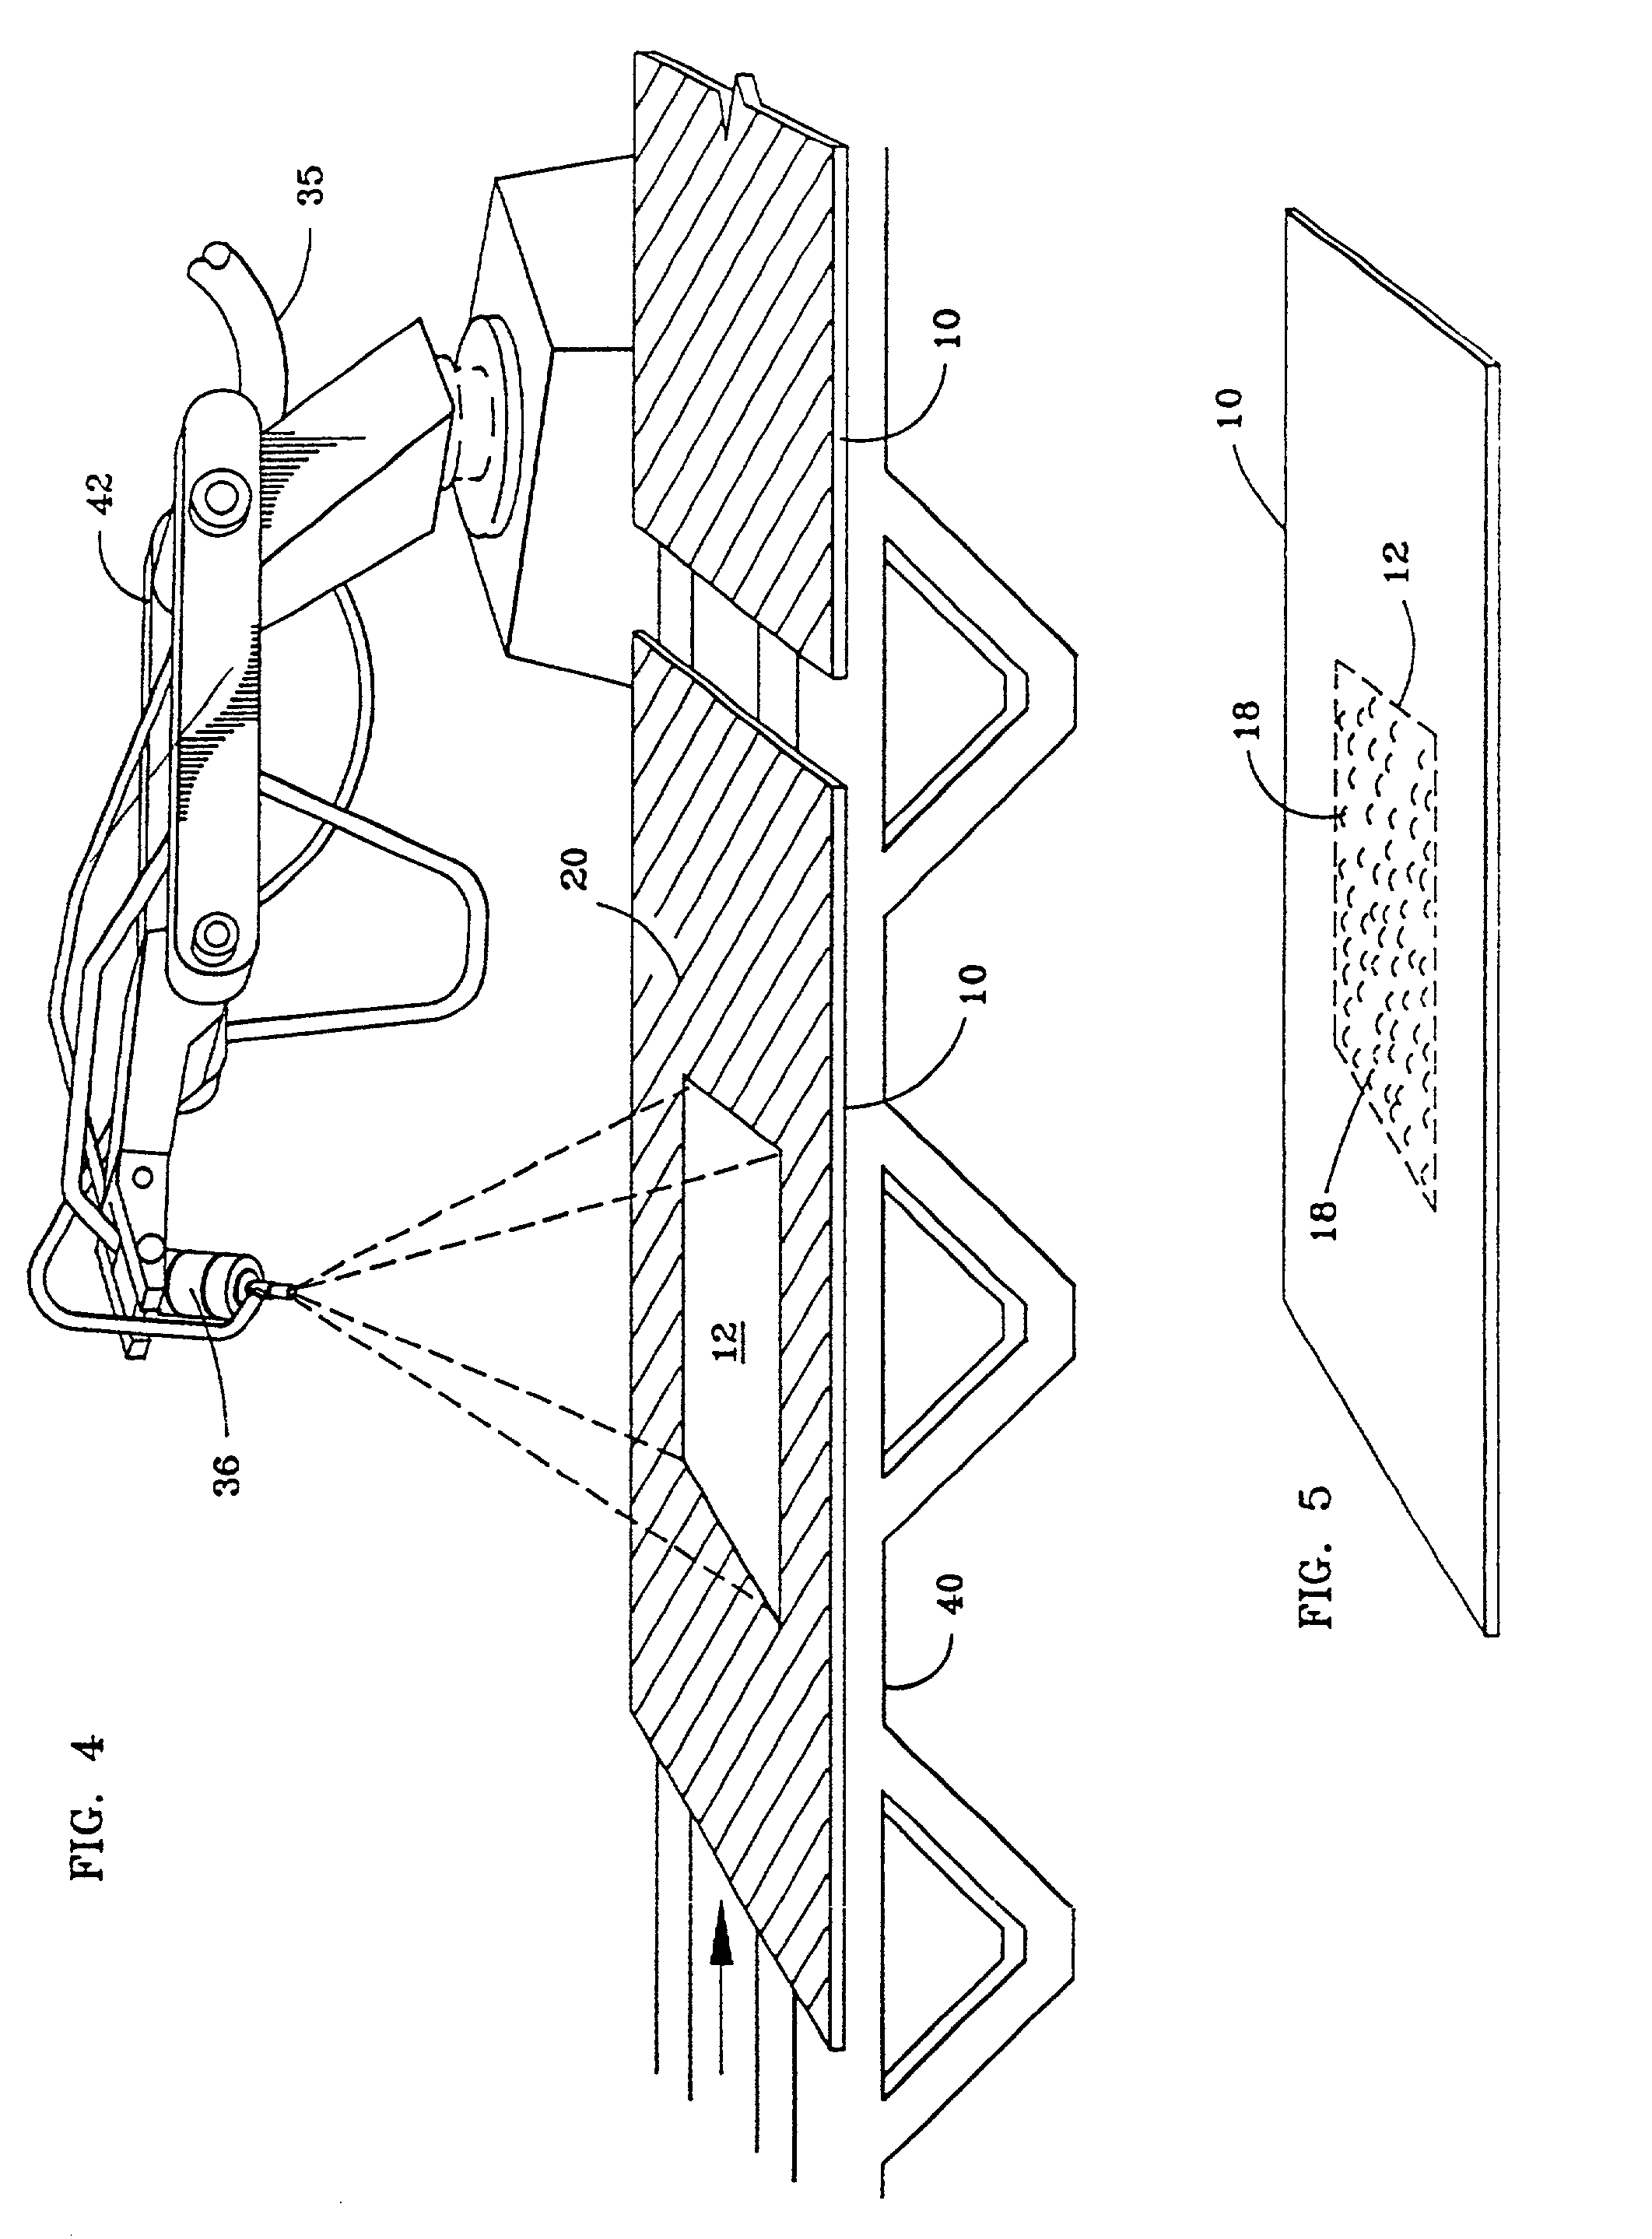 Thermoplastic products having antislip surfaces